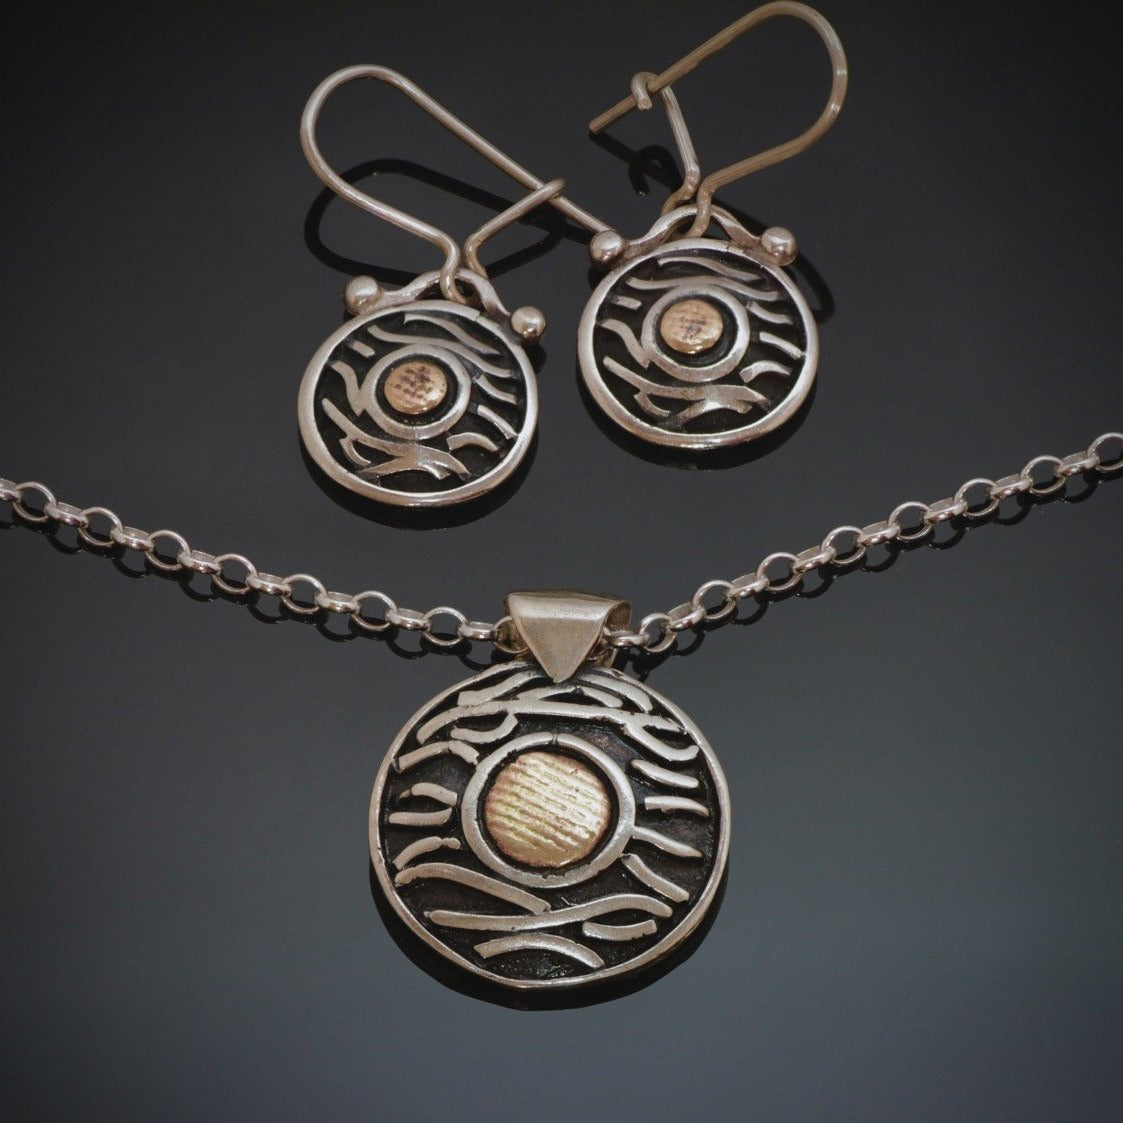 Round Silver Necklace Earring Set, Waves Moon P05/E05